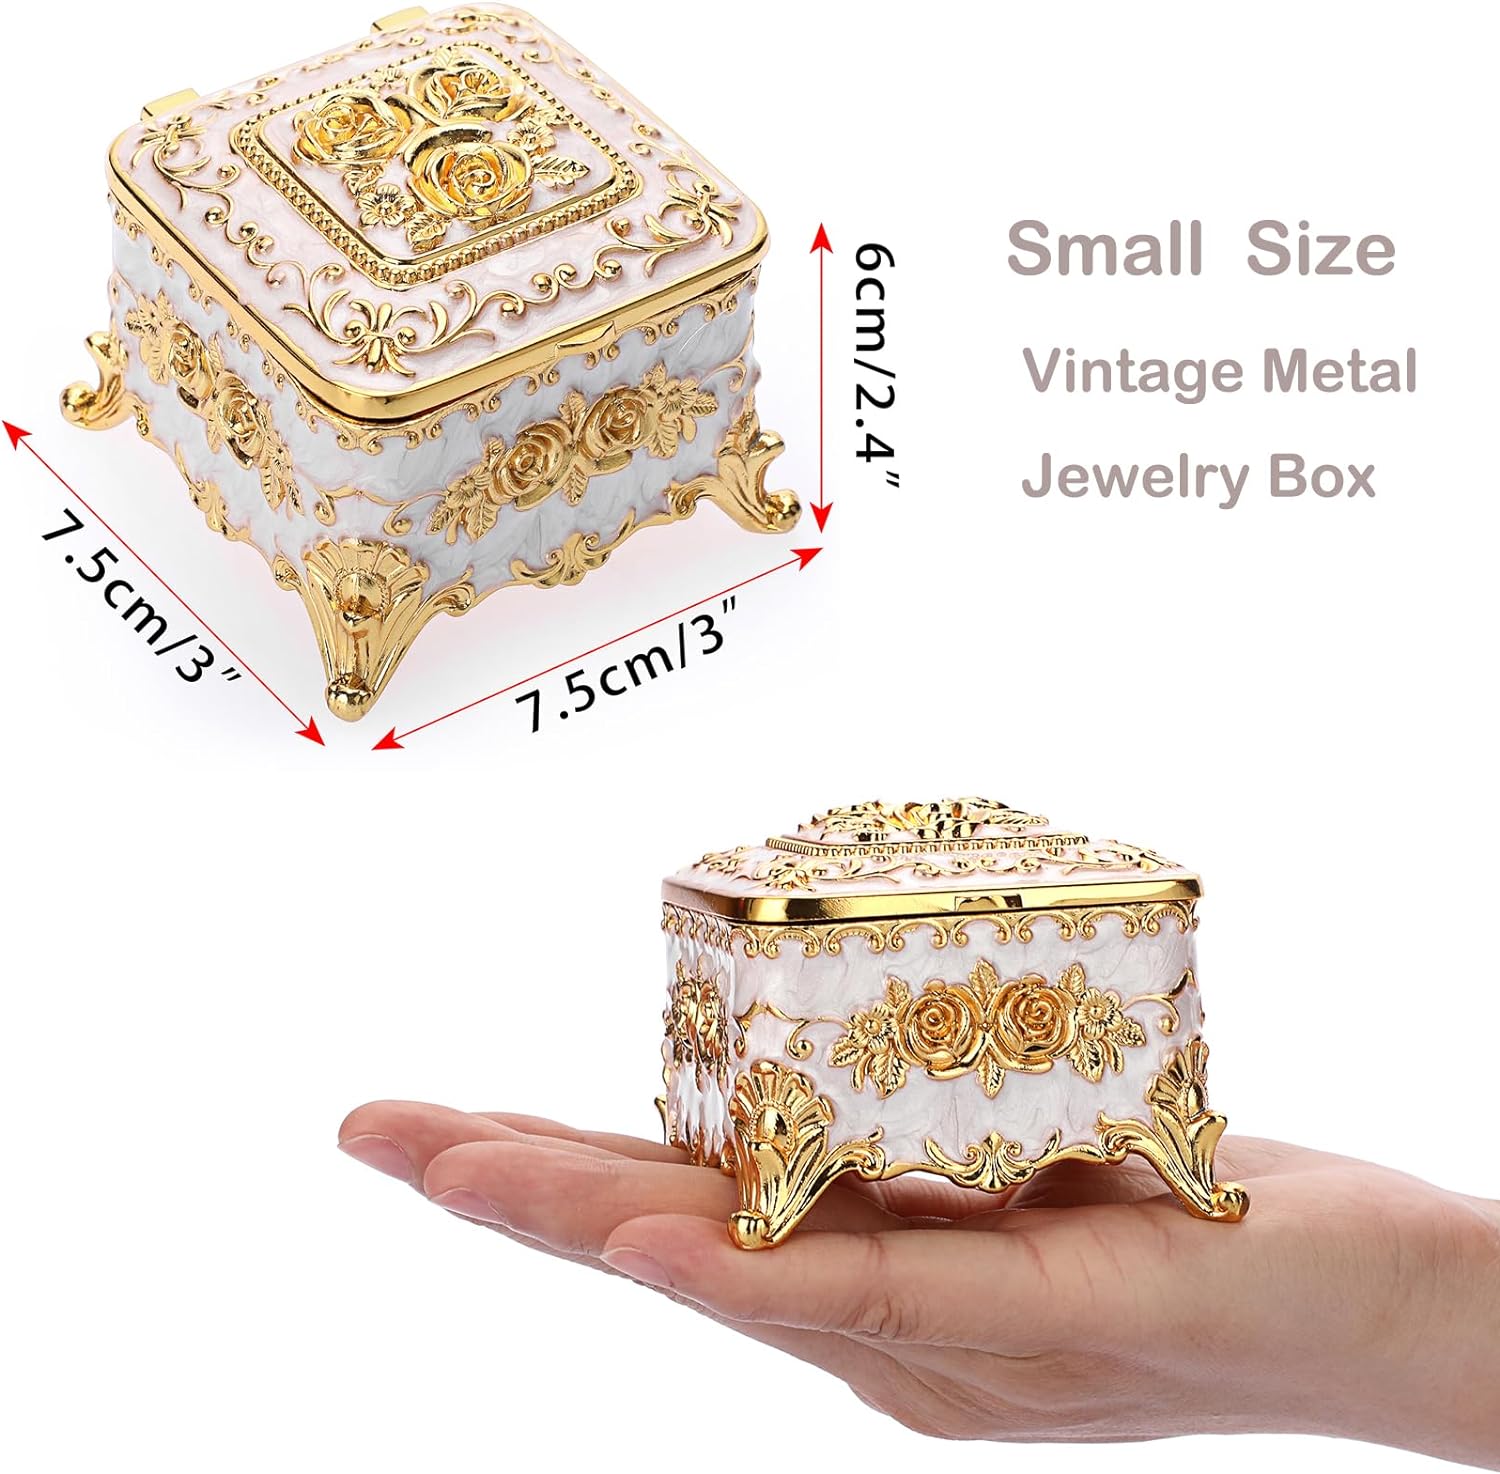 Hipiwe Vintage Metal Jewelry Box - Small Trinket Organizer Ring Box Case with Rose Pattern, Jewelry Storage Box for Ring Earrings Necklace, Keepsake Box for Women Girls, 3x3x2.4